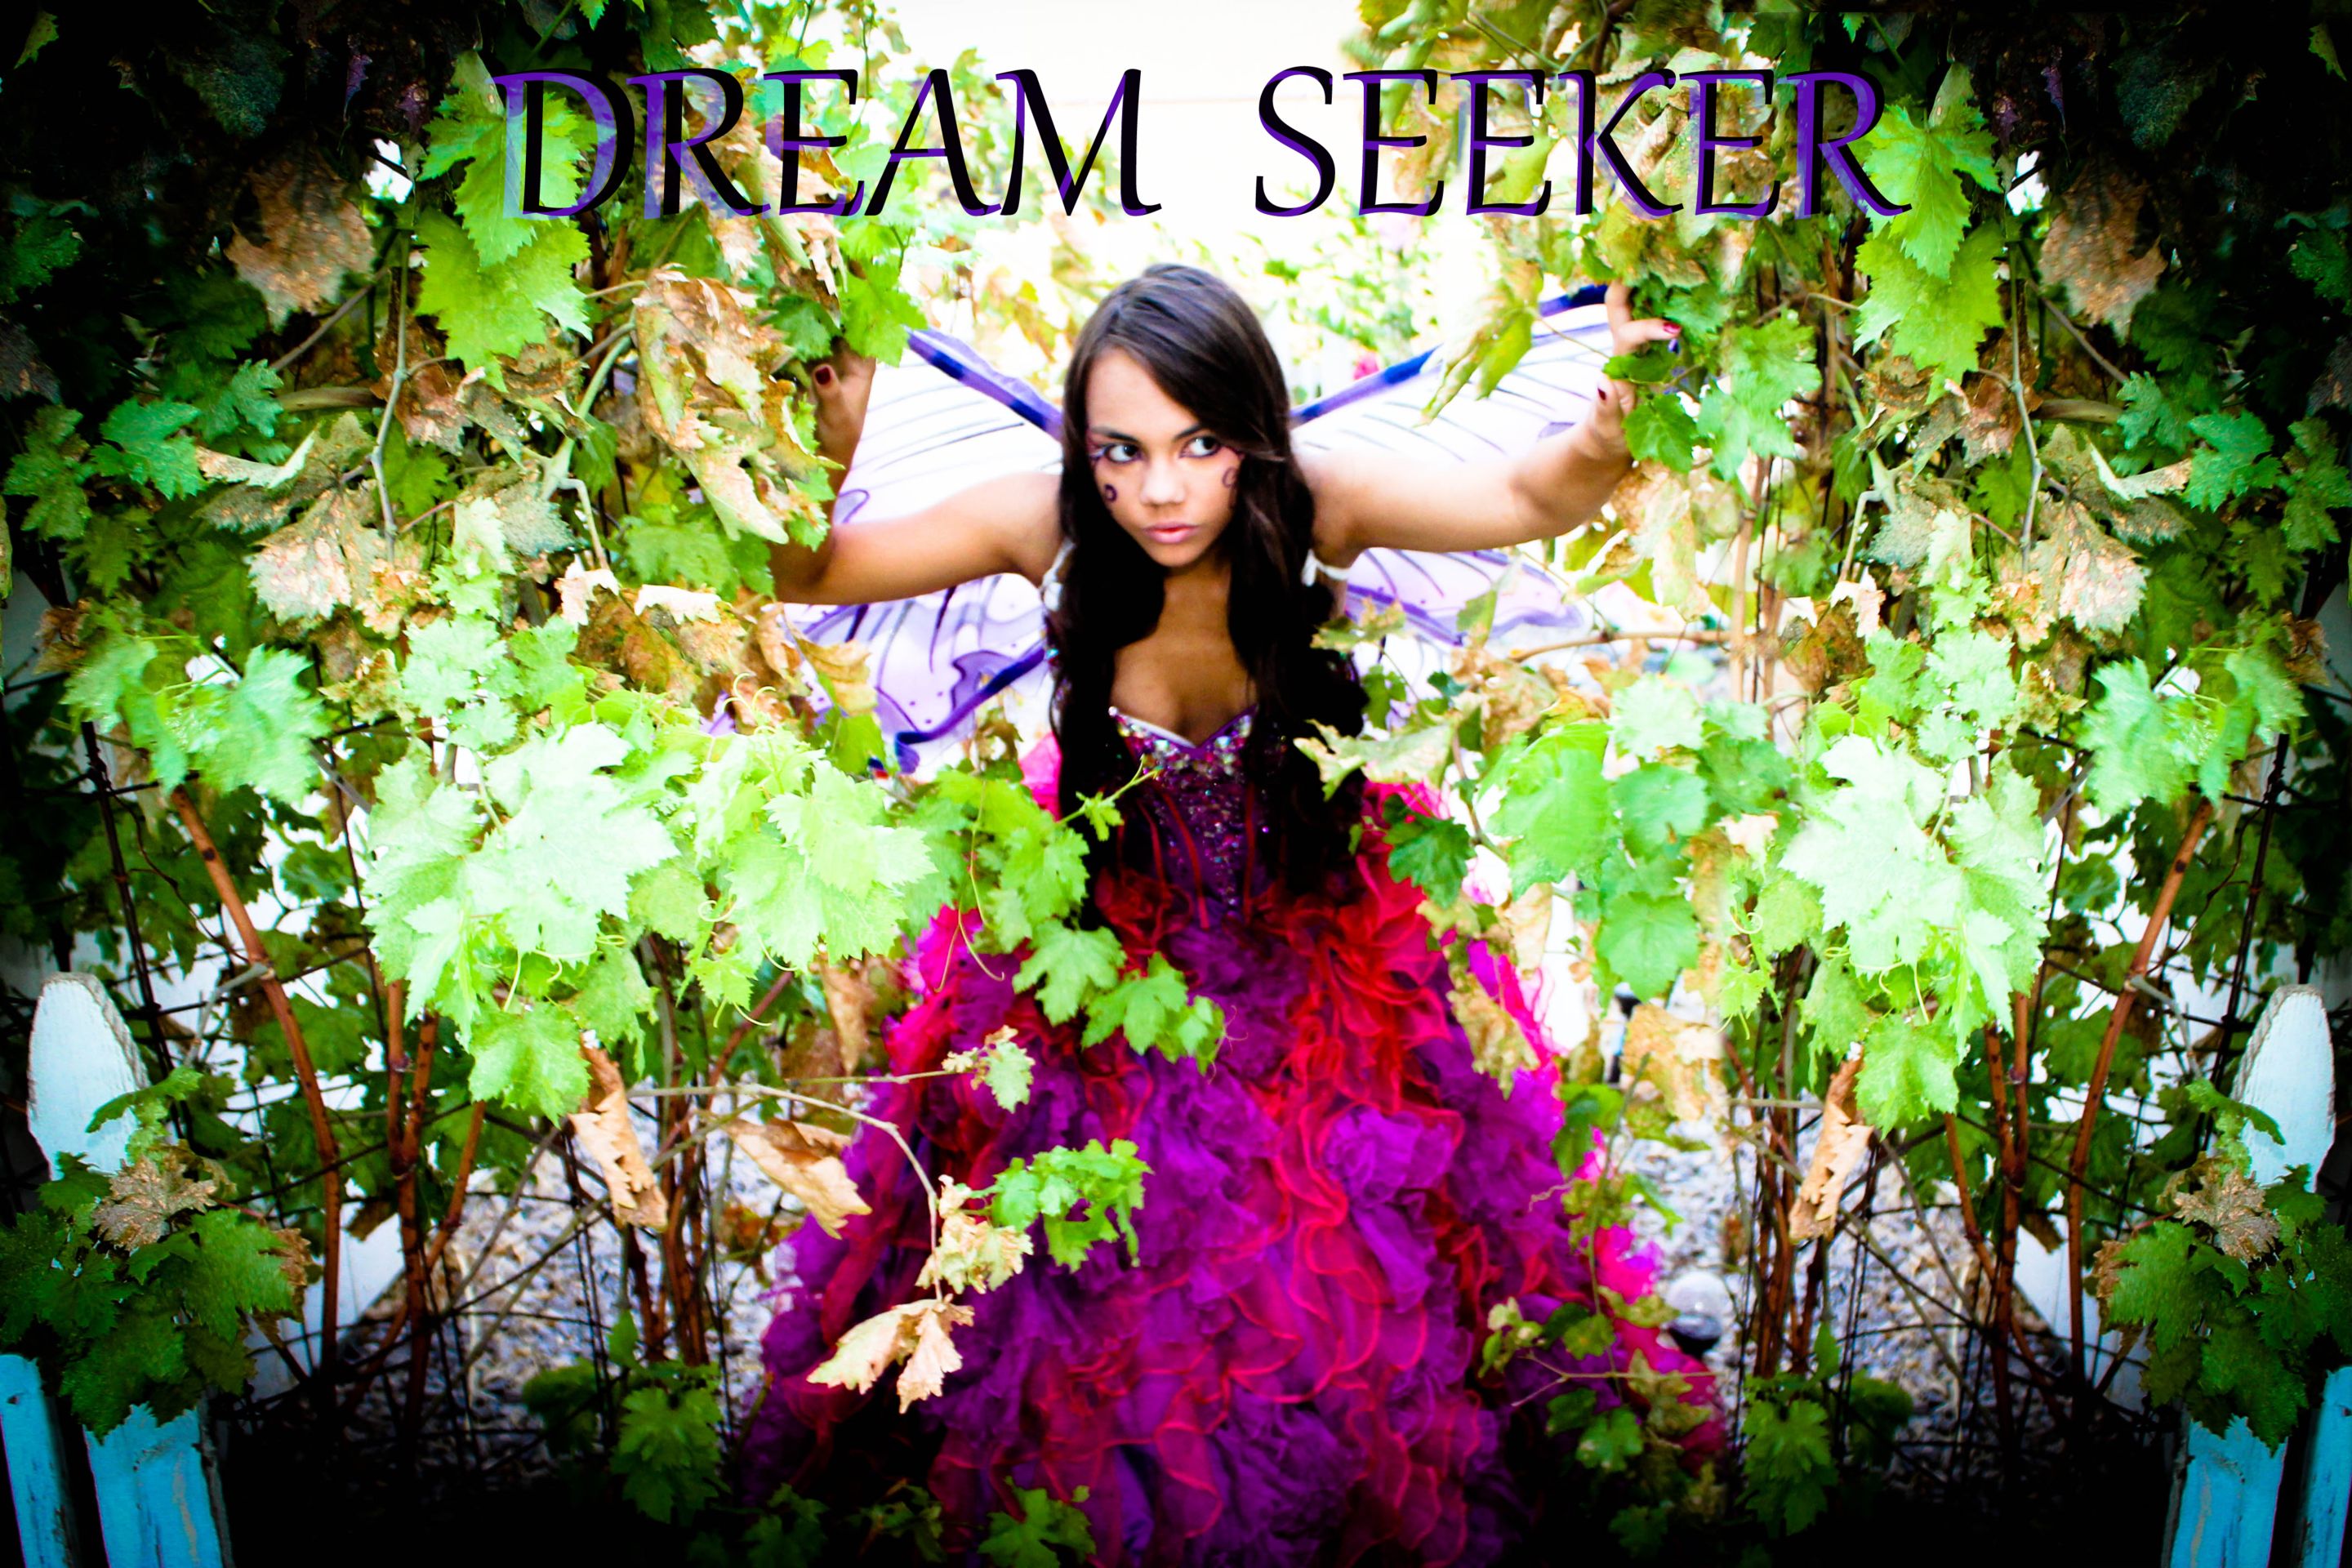 Project for Dream Seekers Productions